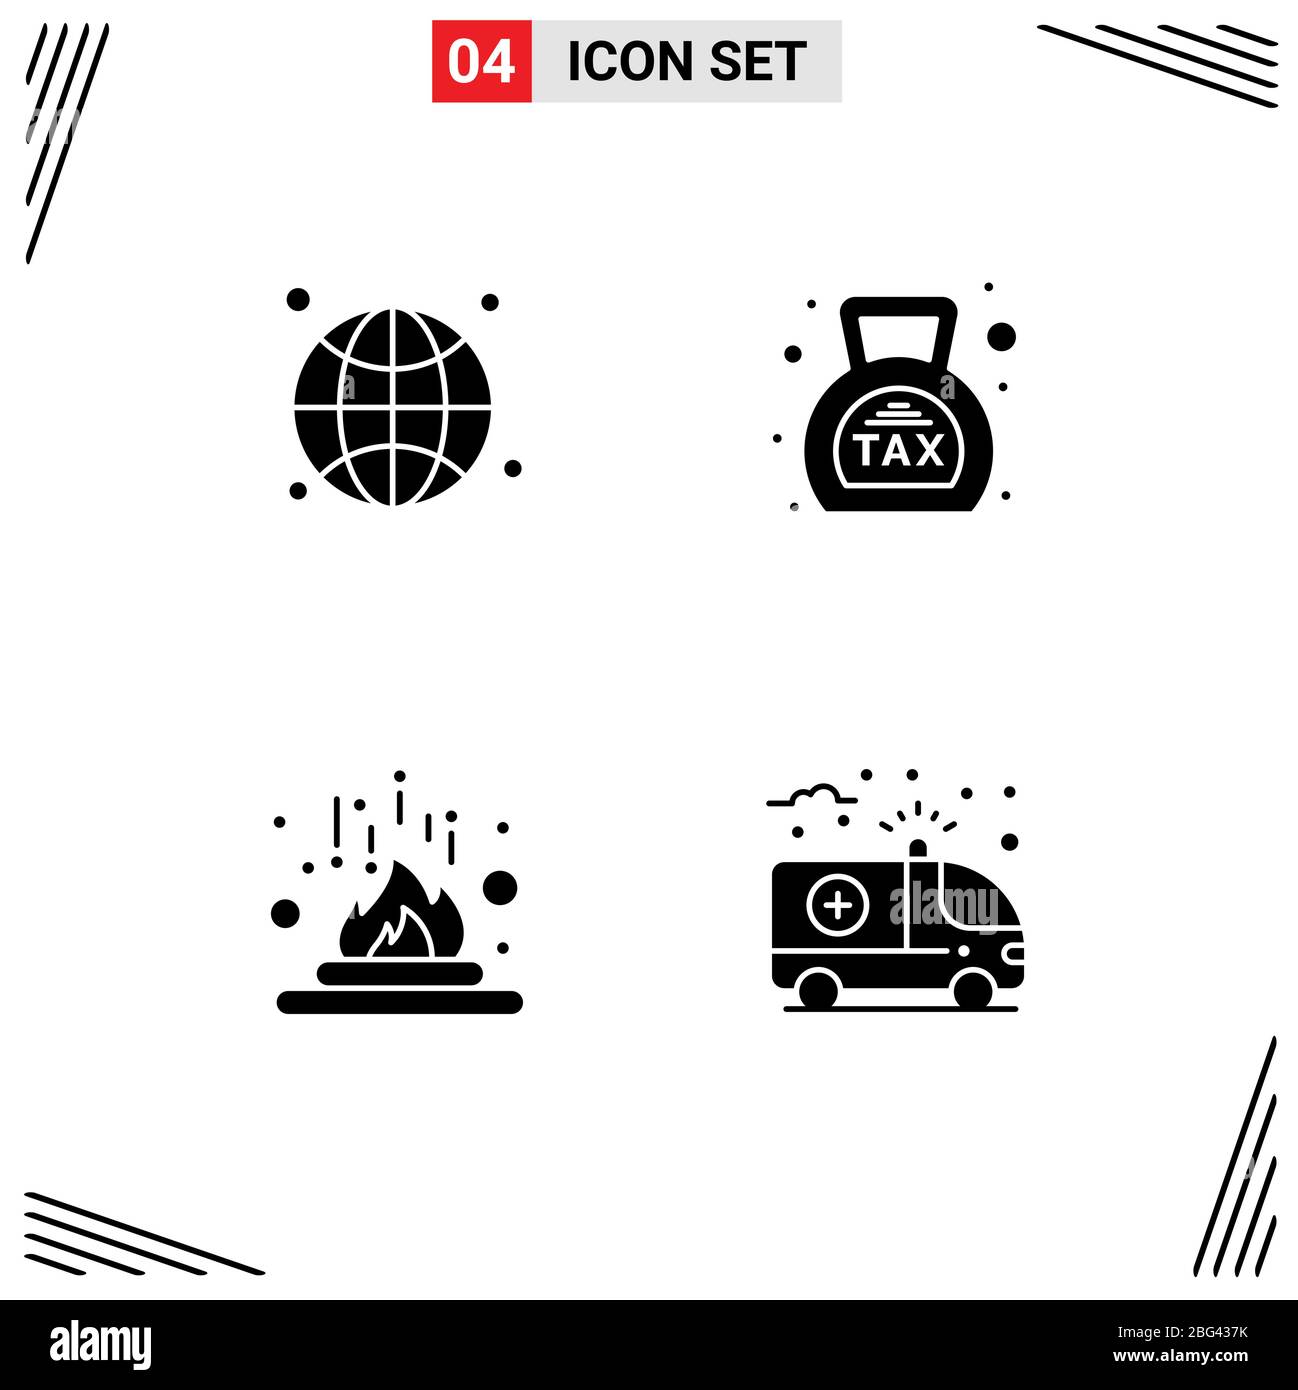 Universal Icon Symbols Group of Modern Solid Glyphs of Global, Chemical, Live, Finance, Heat Editable Vector Design Elements Illustrazione Vettoriale